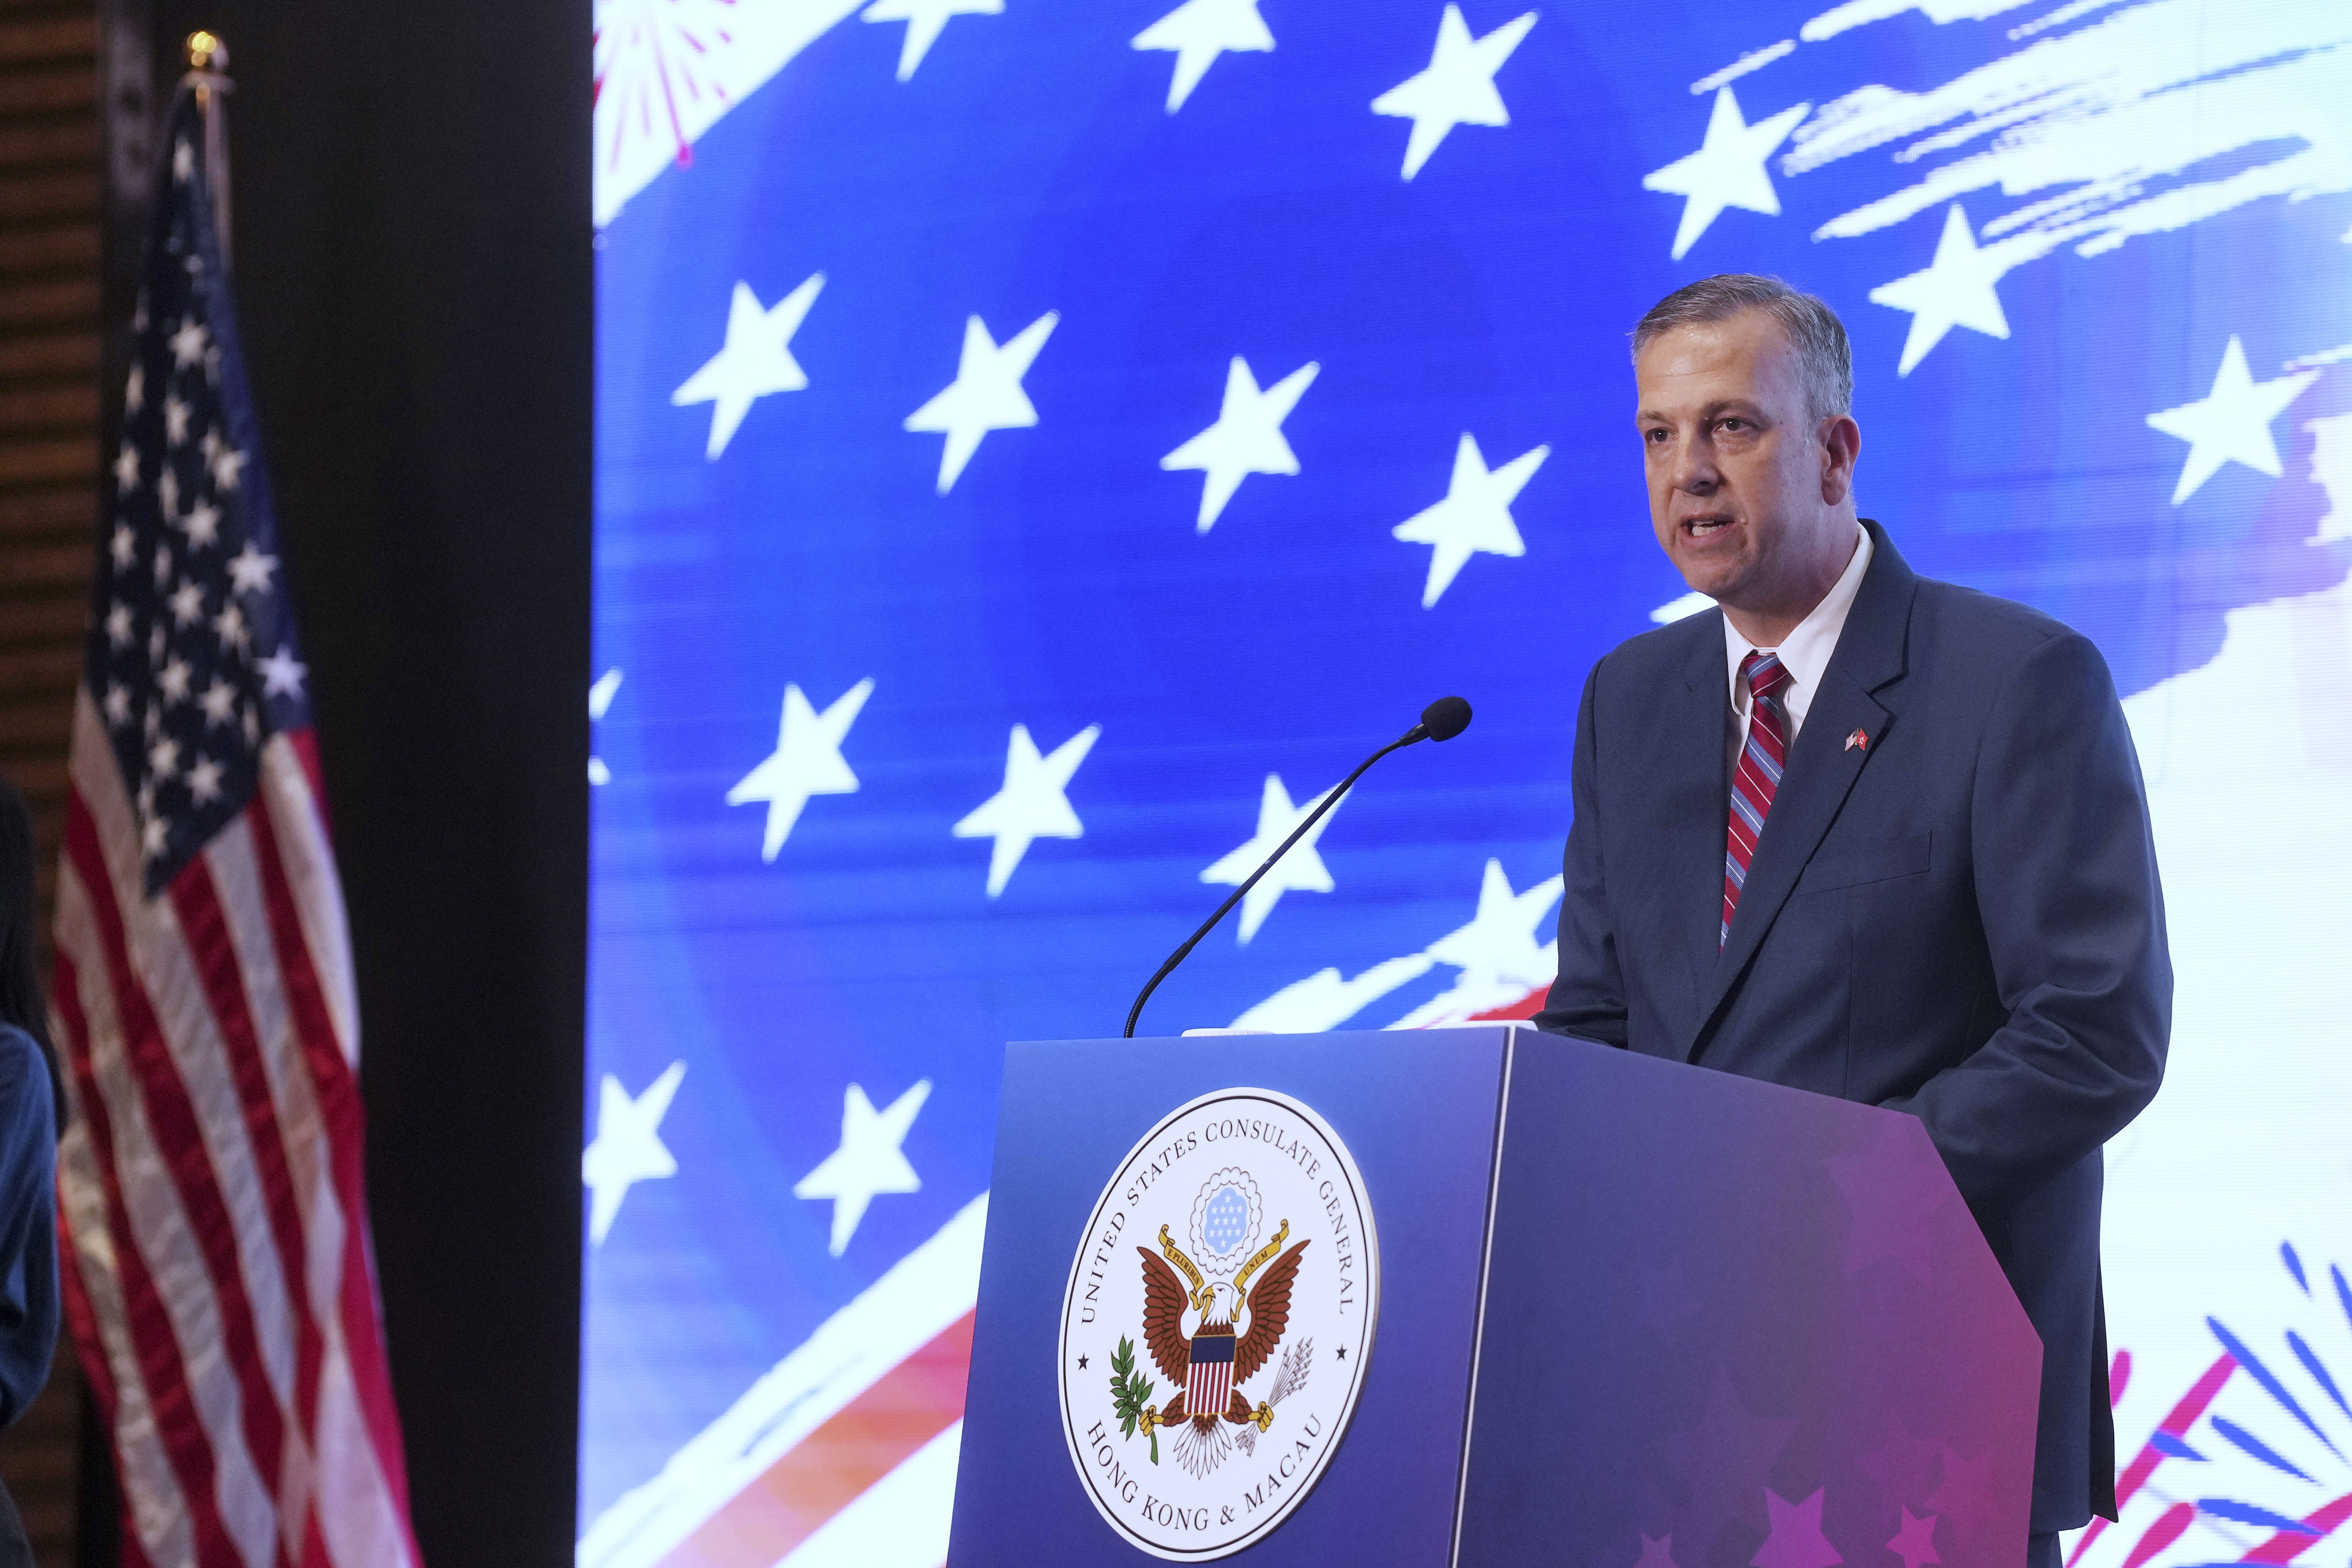 Gregory May, US consul general to Hong Kong and Macau, at a cocktail reception ahead of America’s July 4 Independence Day. Photo: SCMP / Elson Li